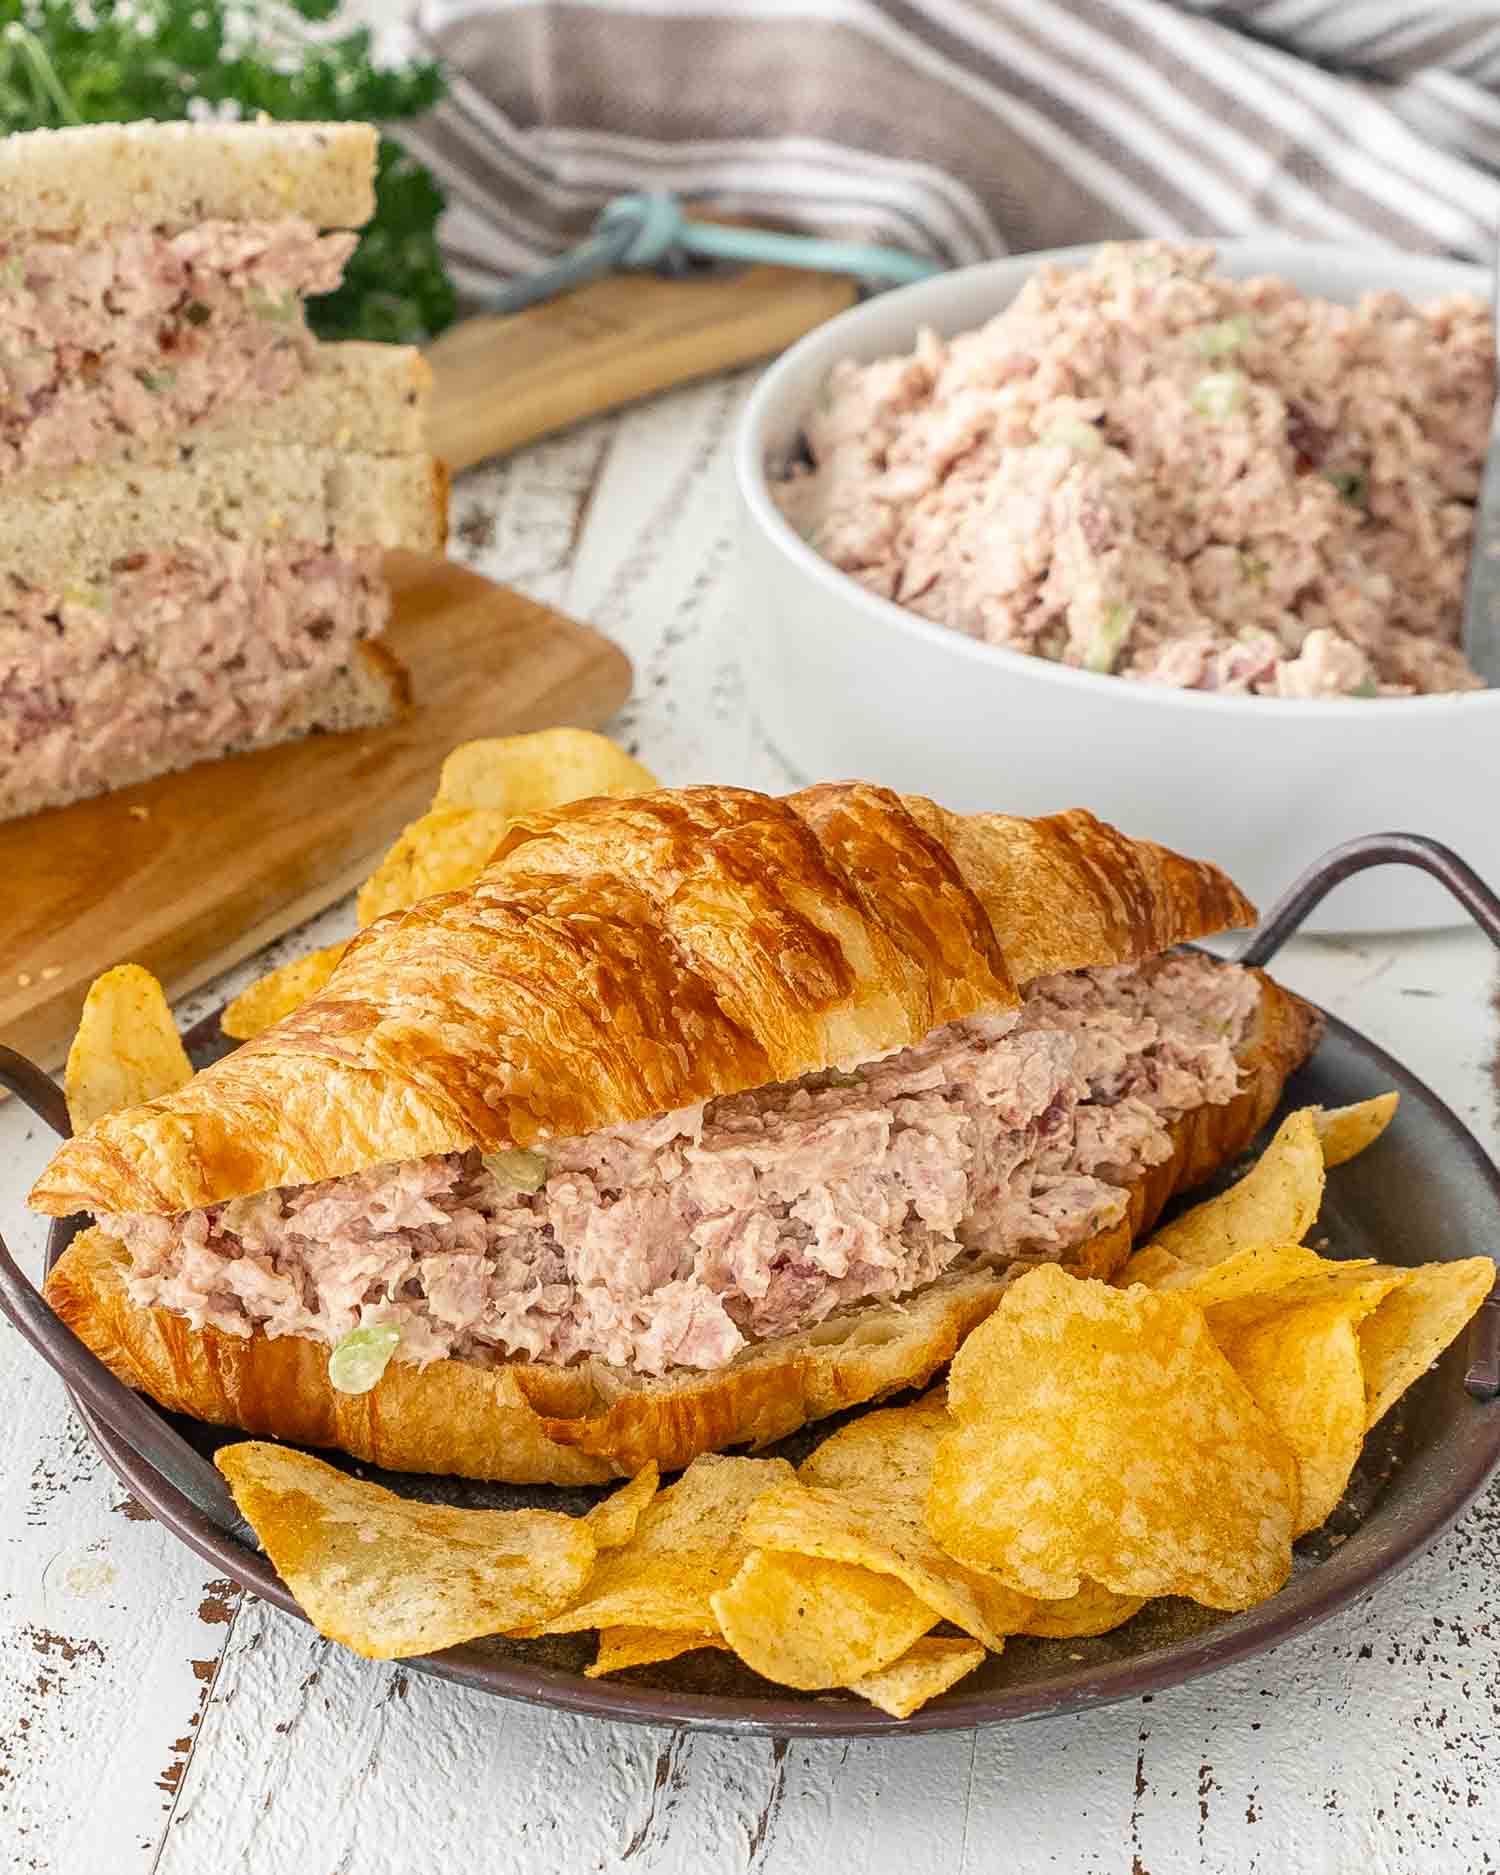 a croissant with ham salad on a plate along side some potato chips.